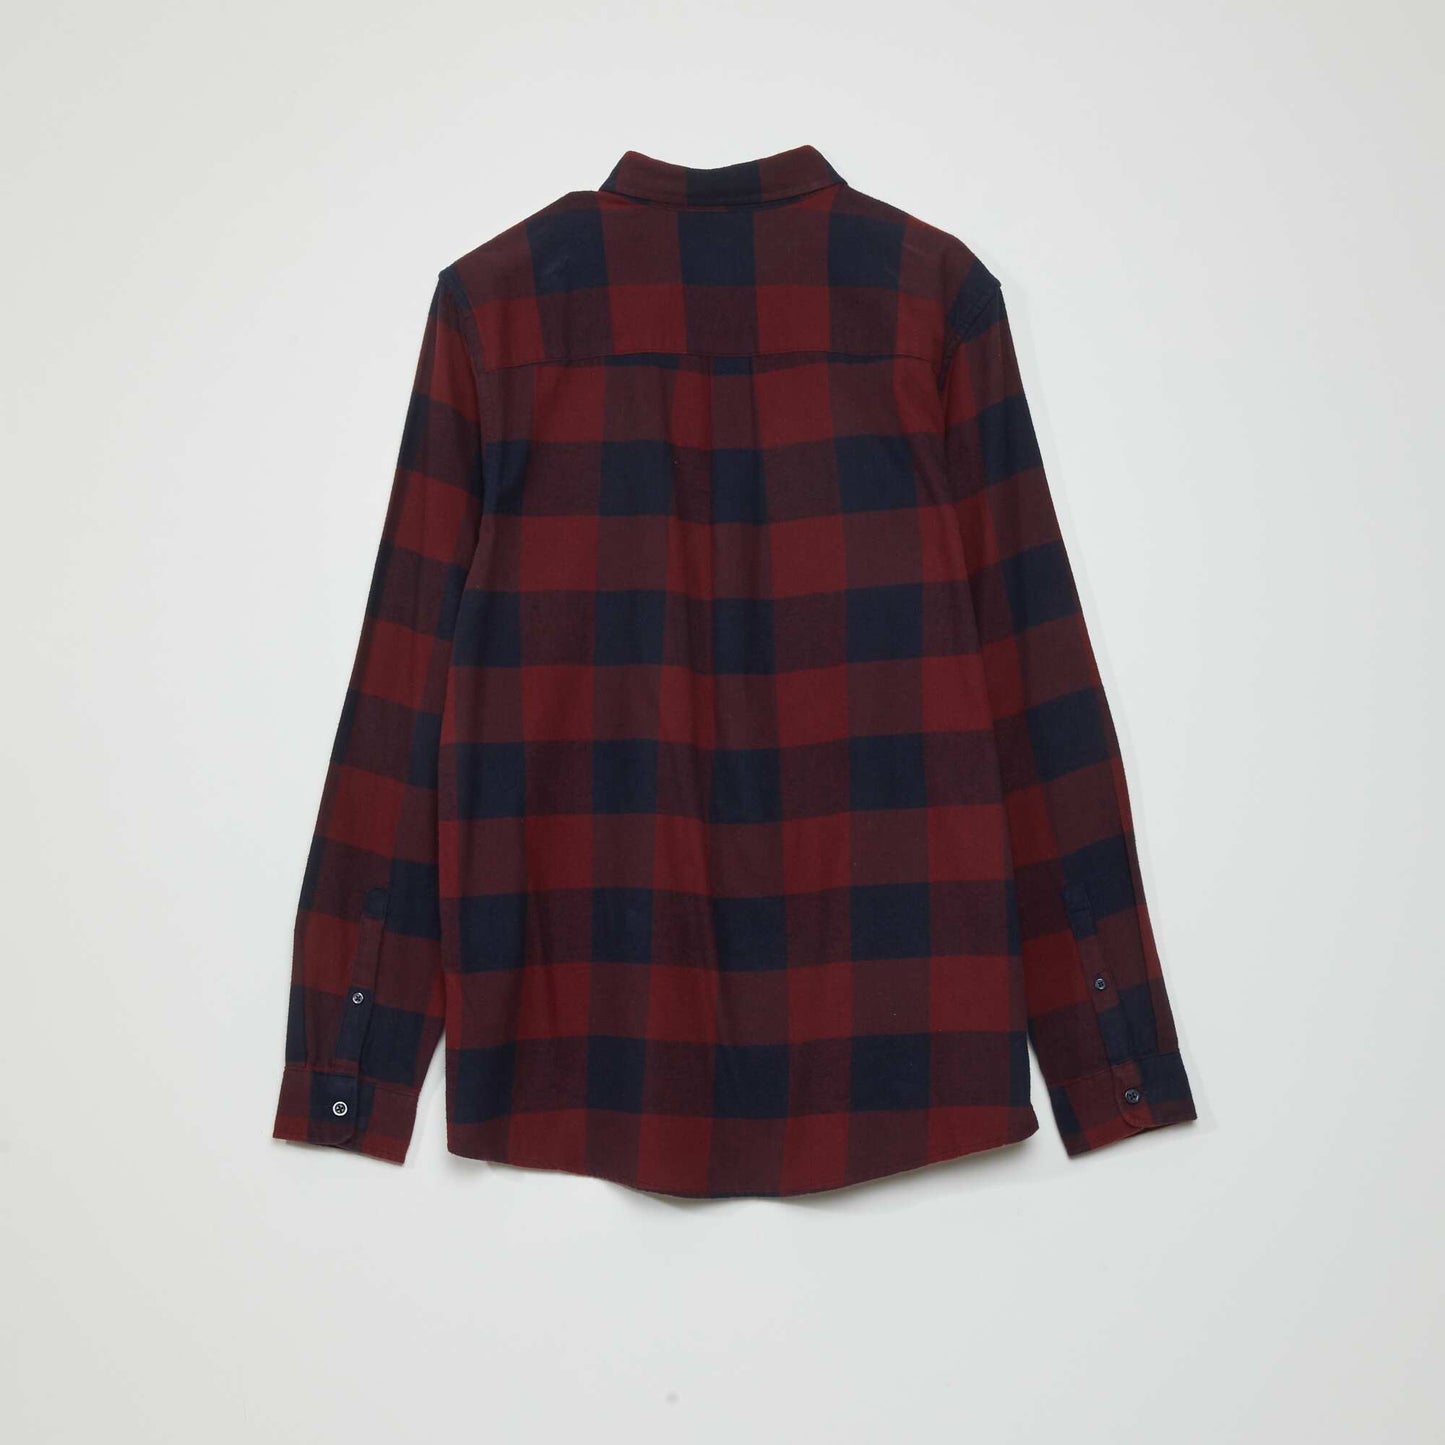 Straight flannel shirt Red